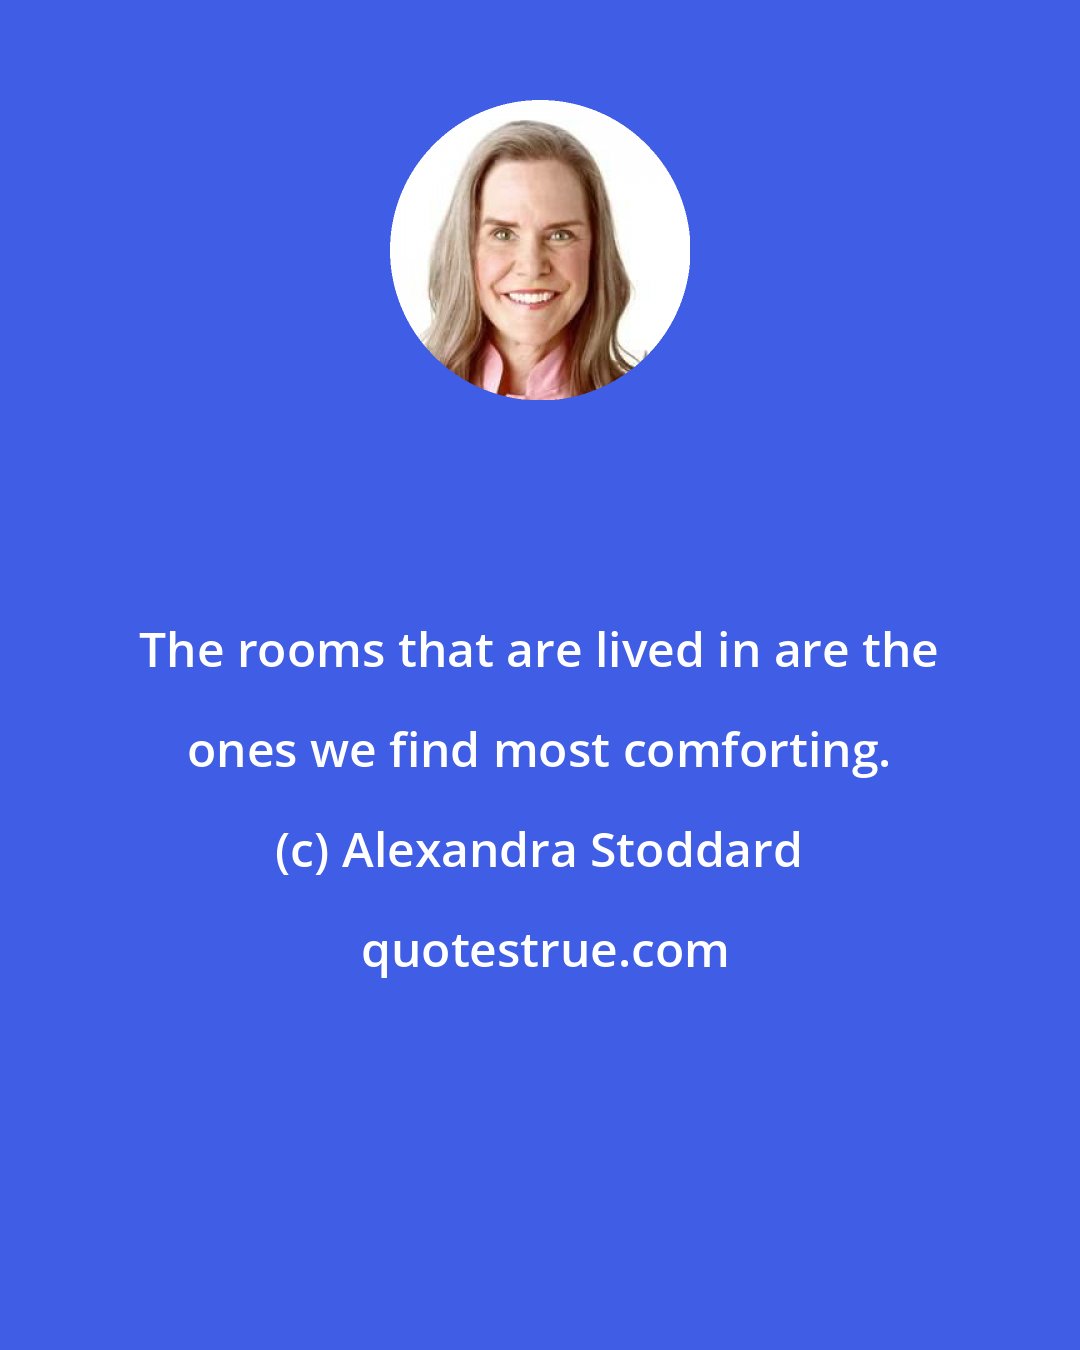 Alexandra Stoddard: The rooms that are lived in are the ones we find most comforting.